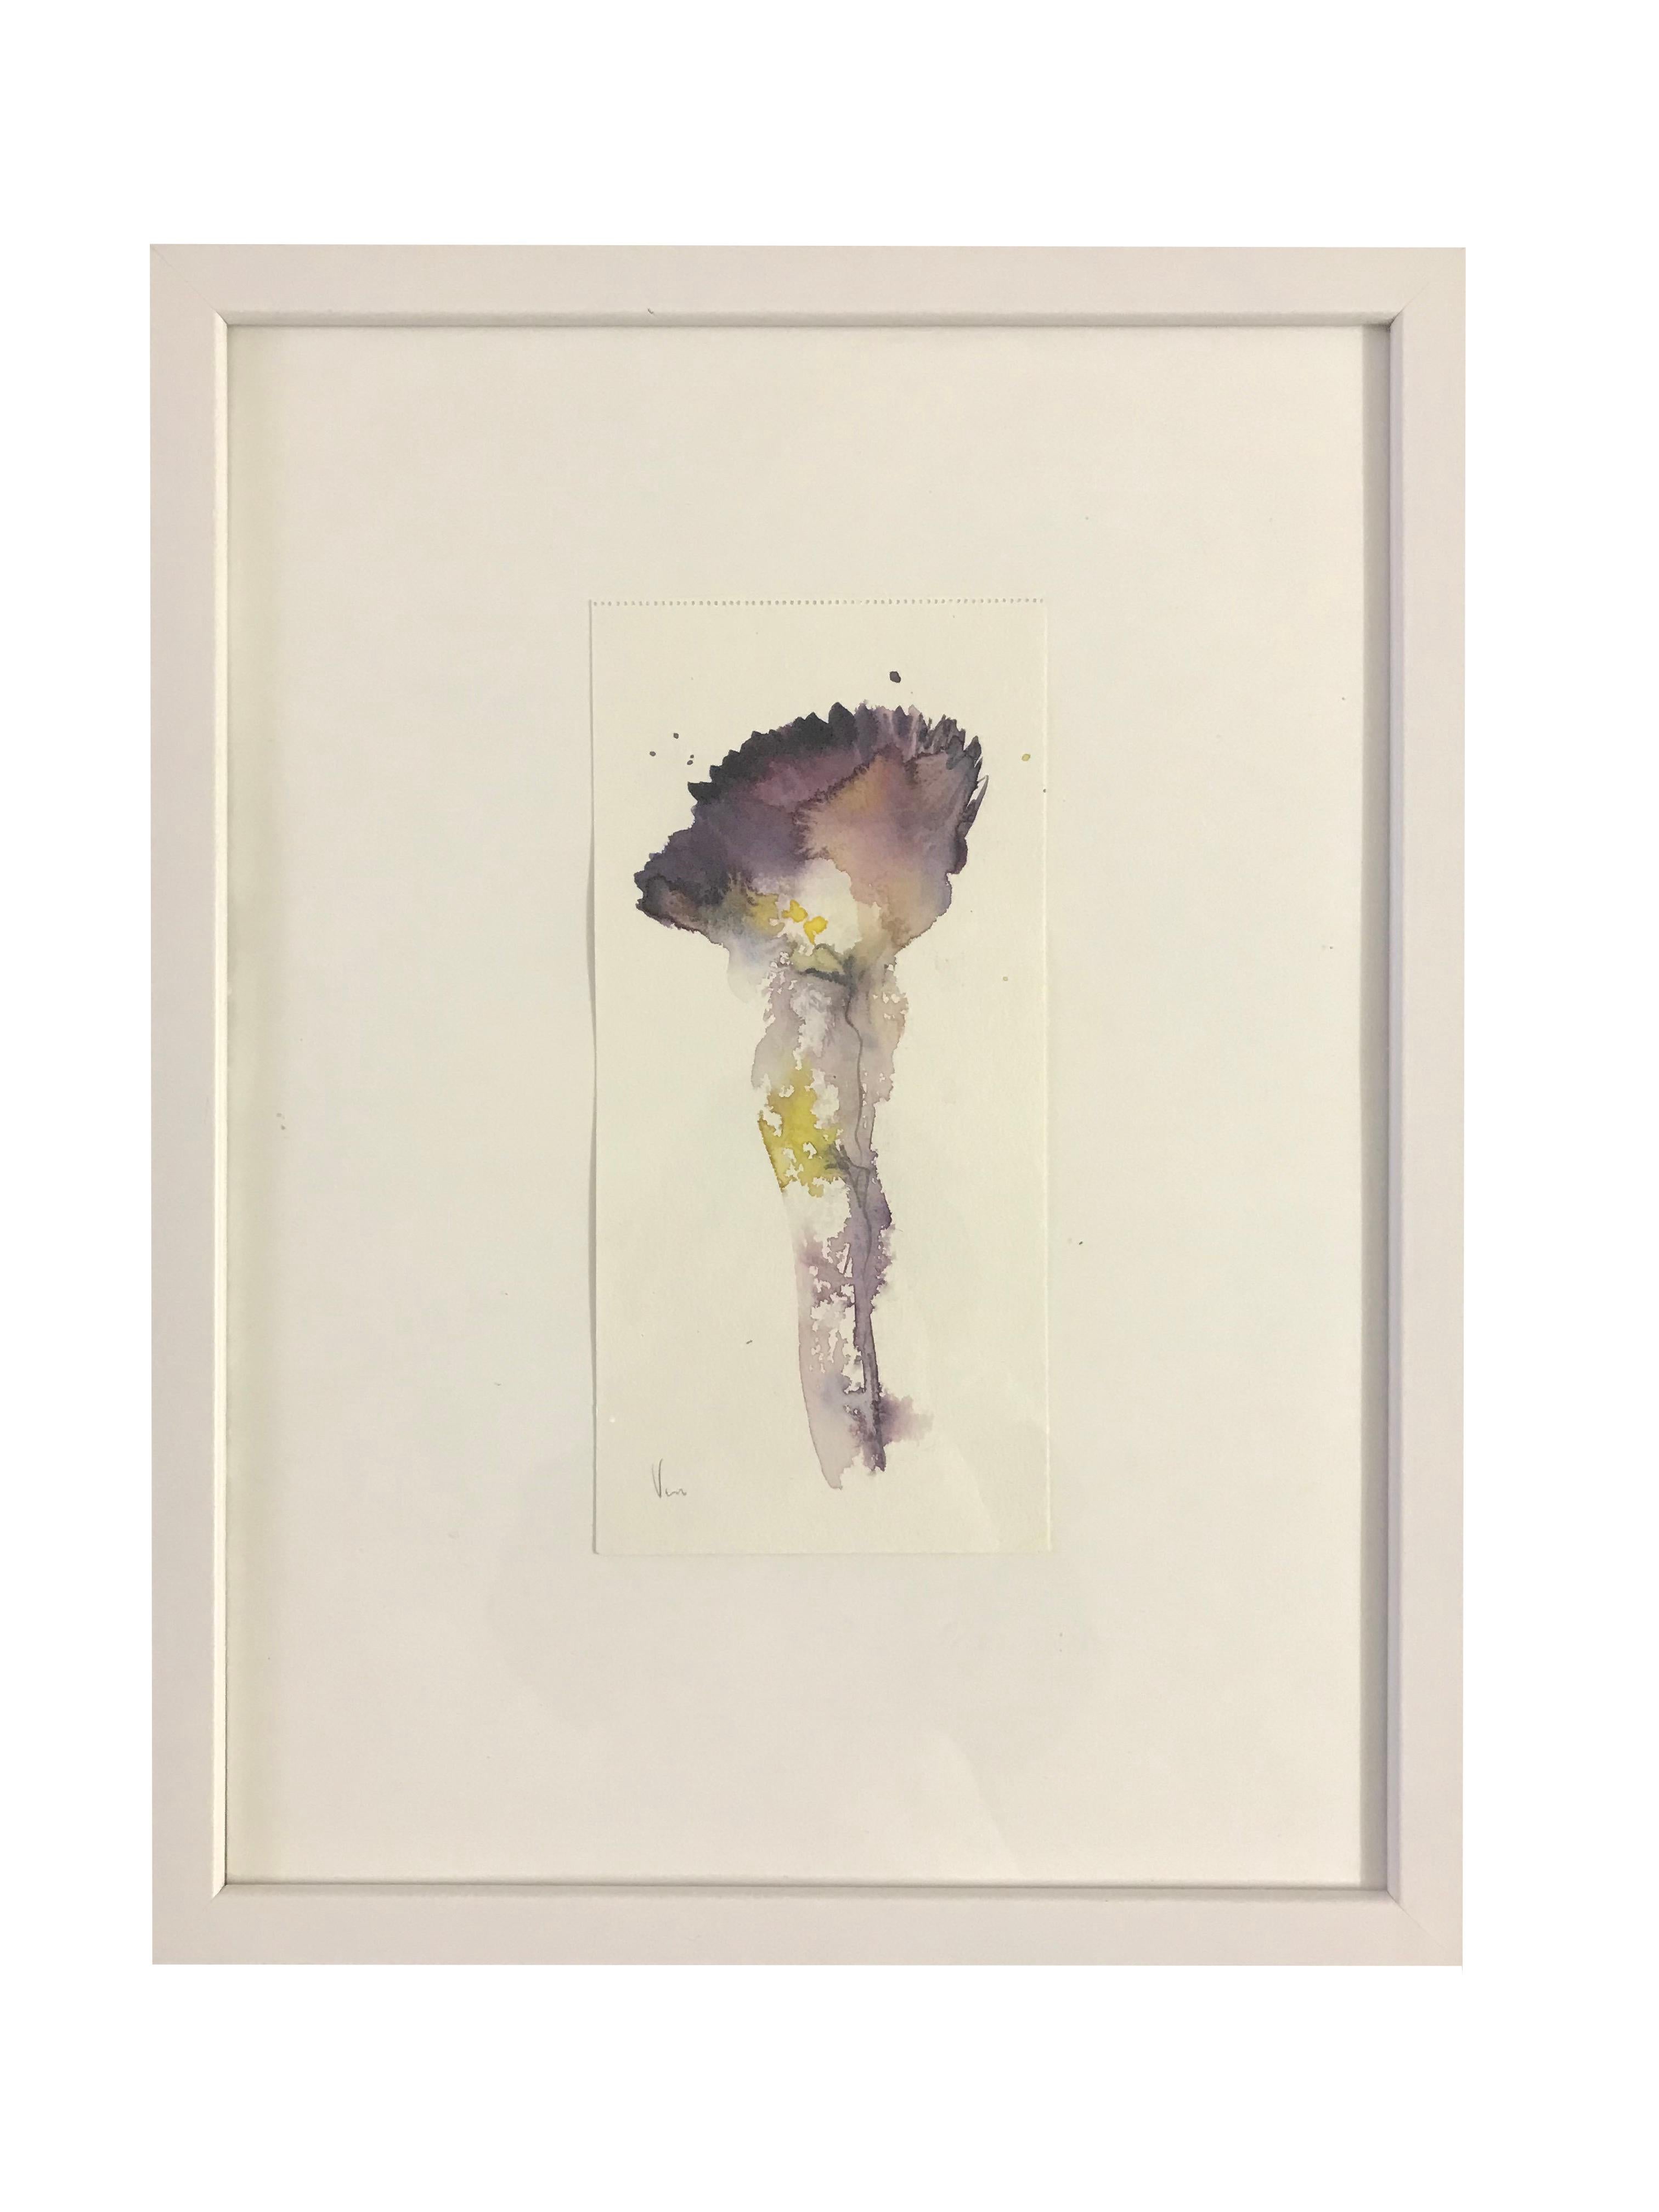 Watercolor on Hahnemuhle paper
Artwork unframed for $250